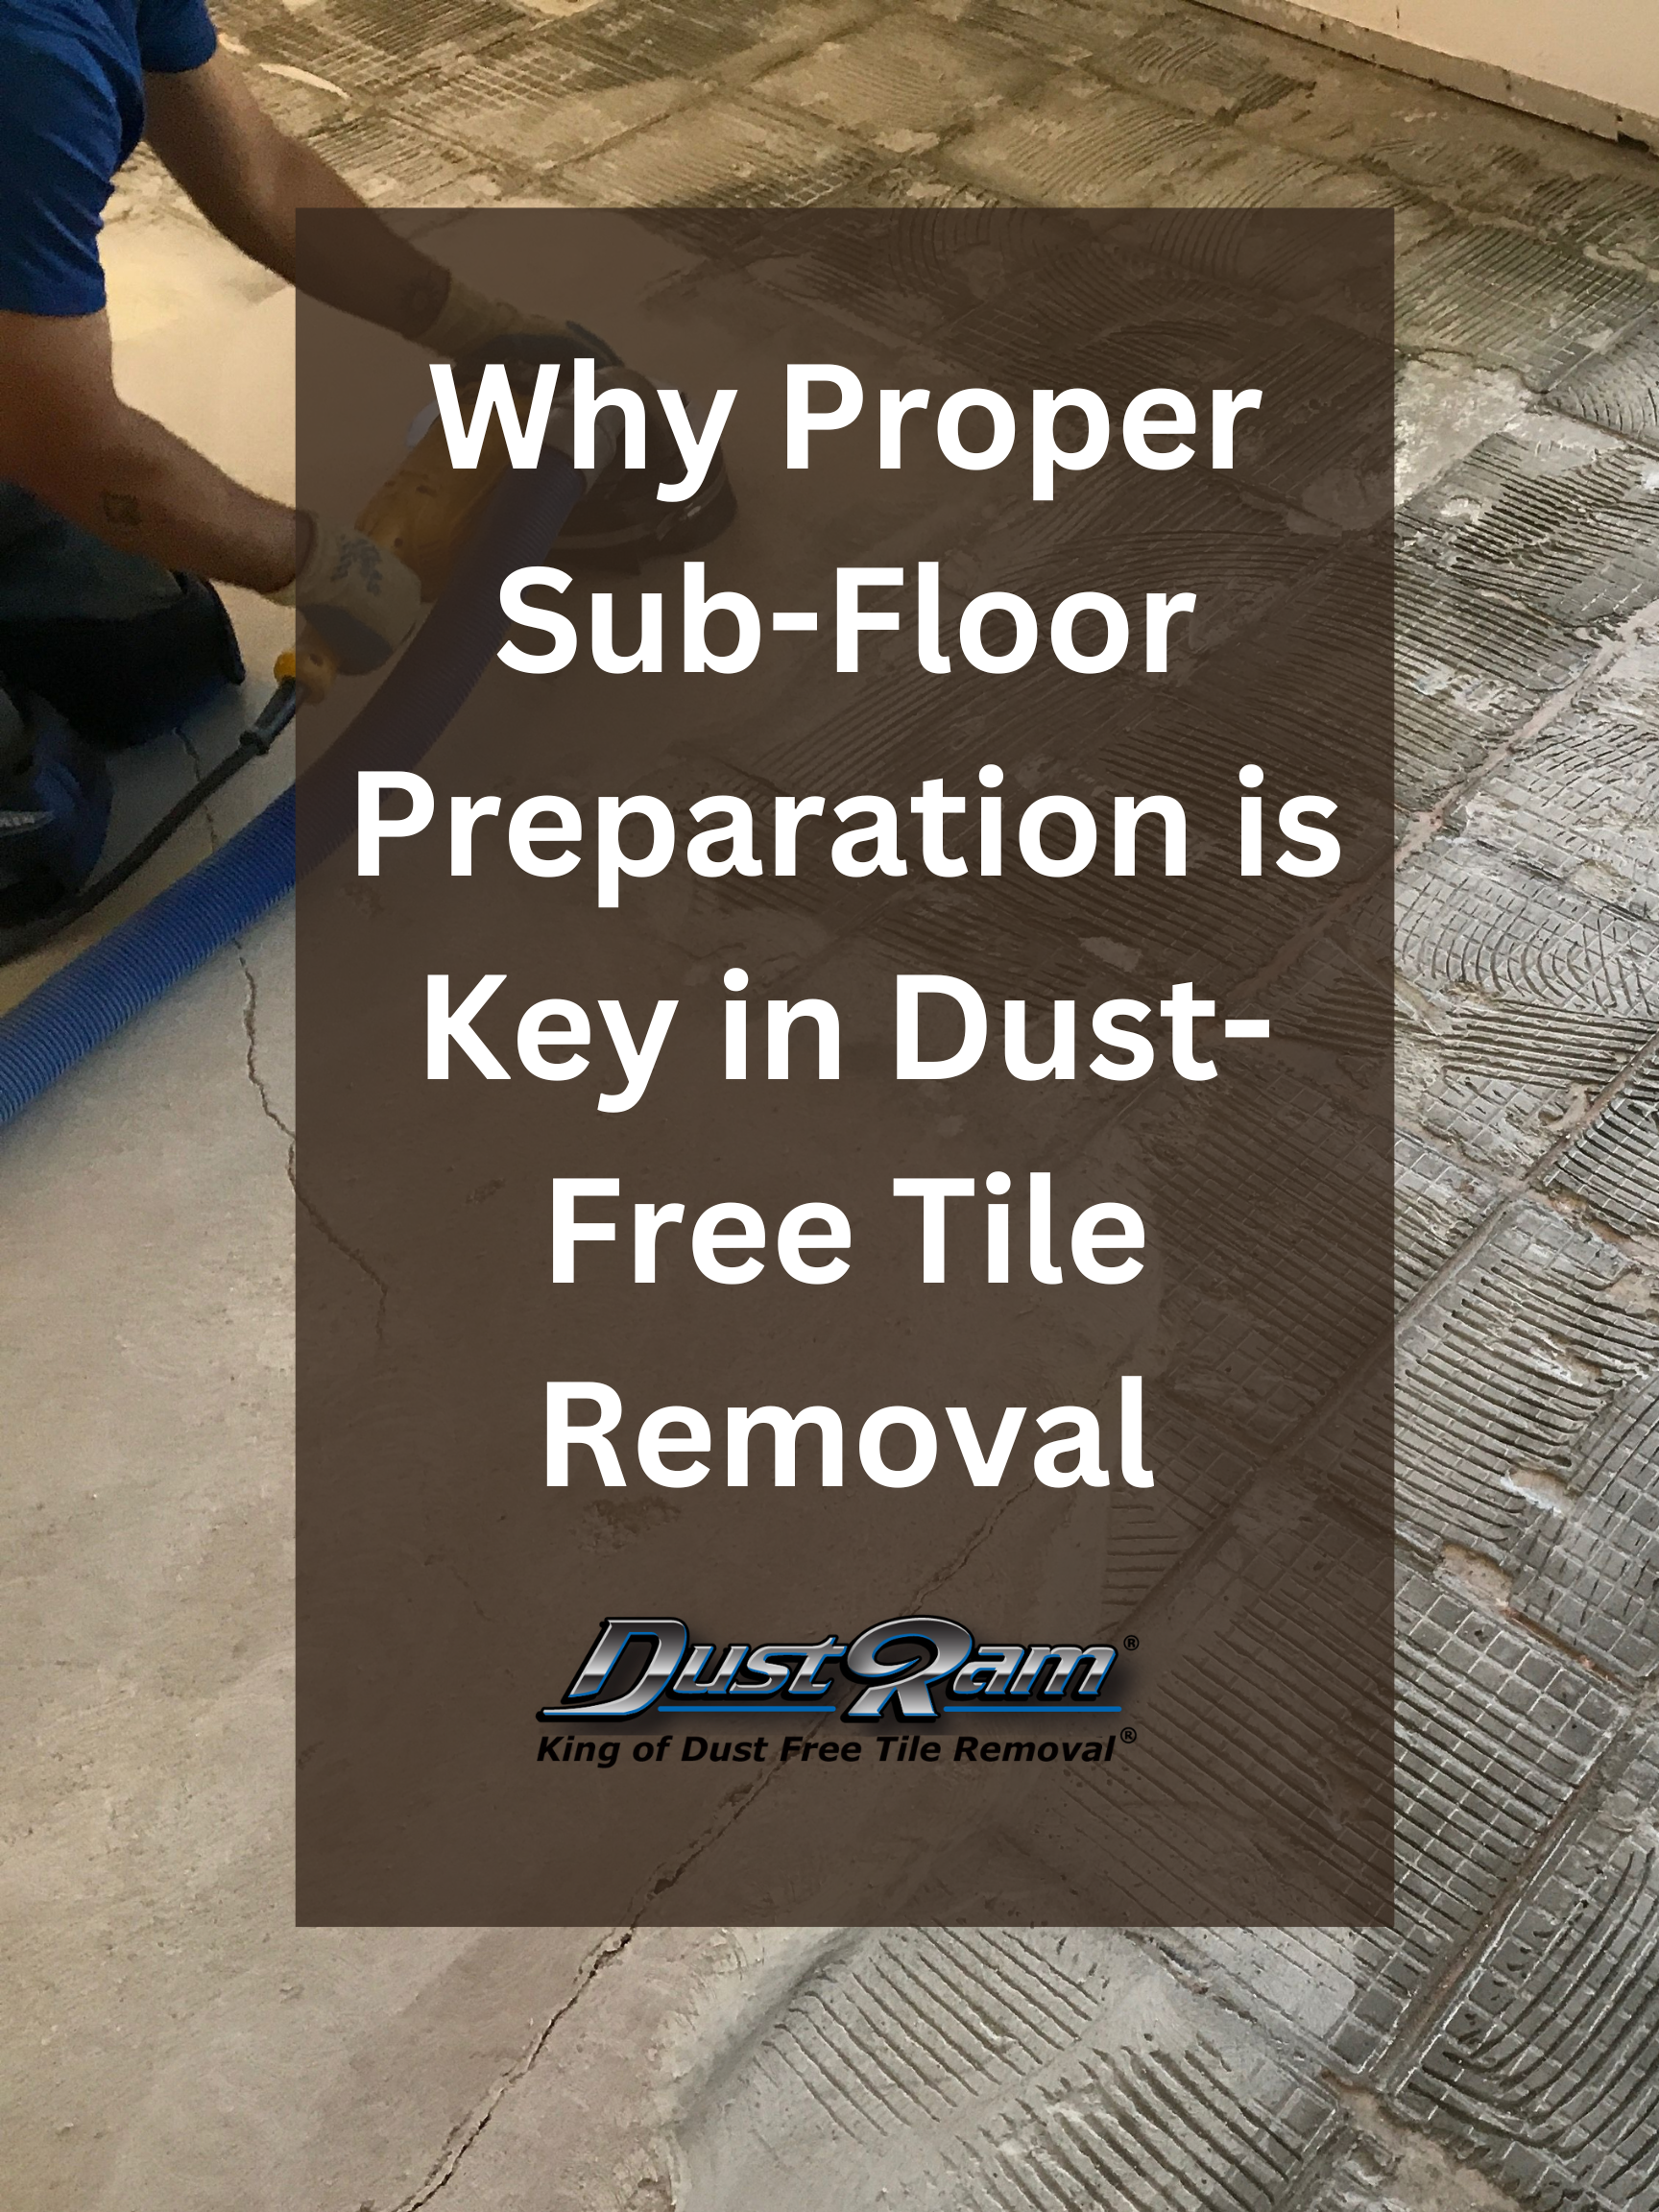 Why Proper Sub-Floor Preparation is Key in Dust-Free Tile Removal